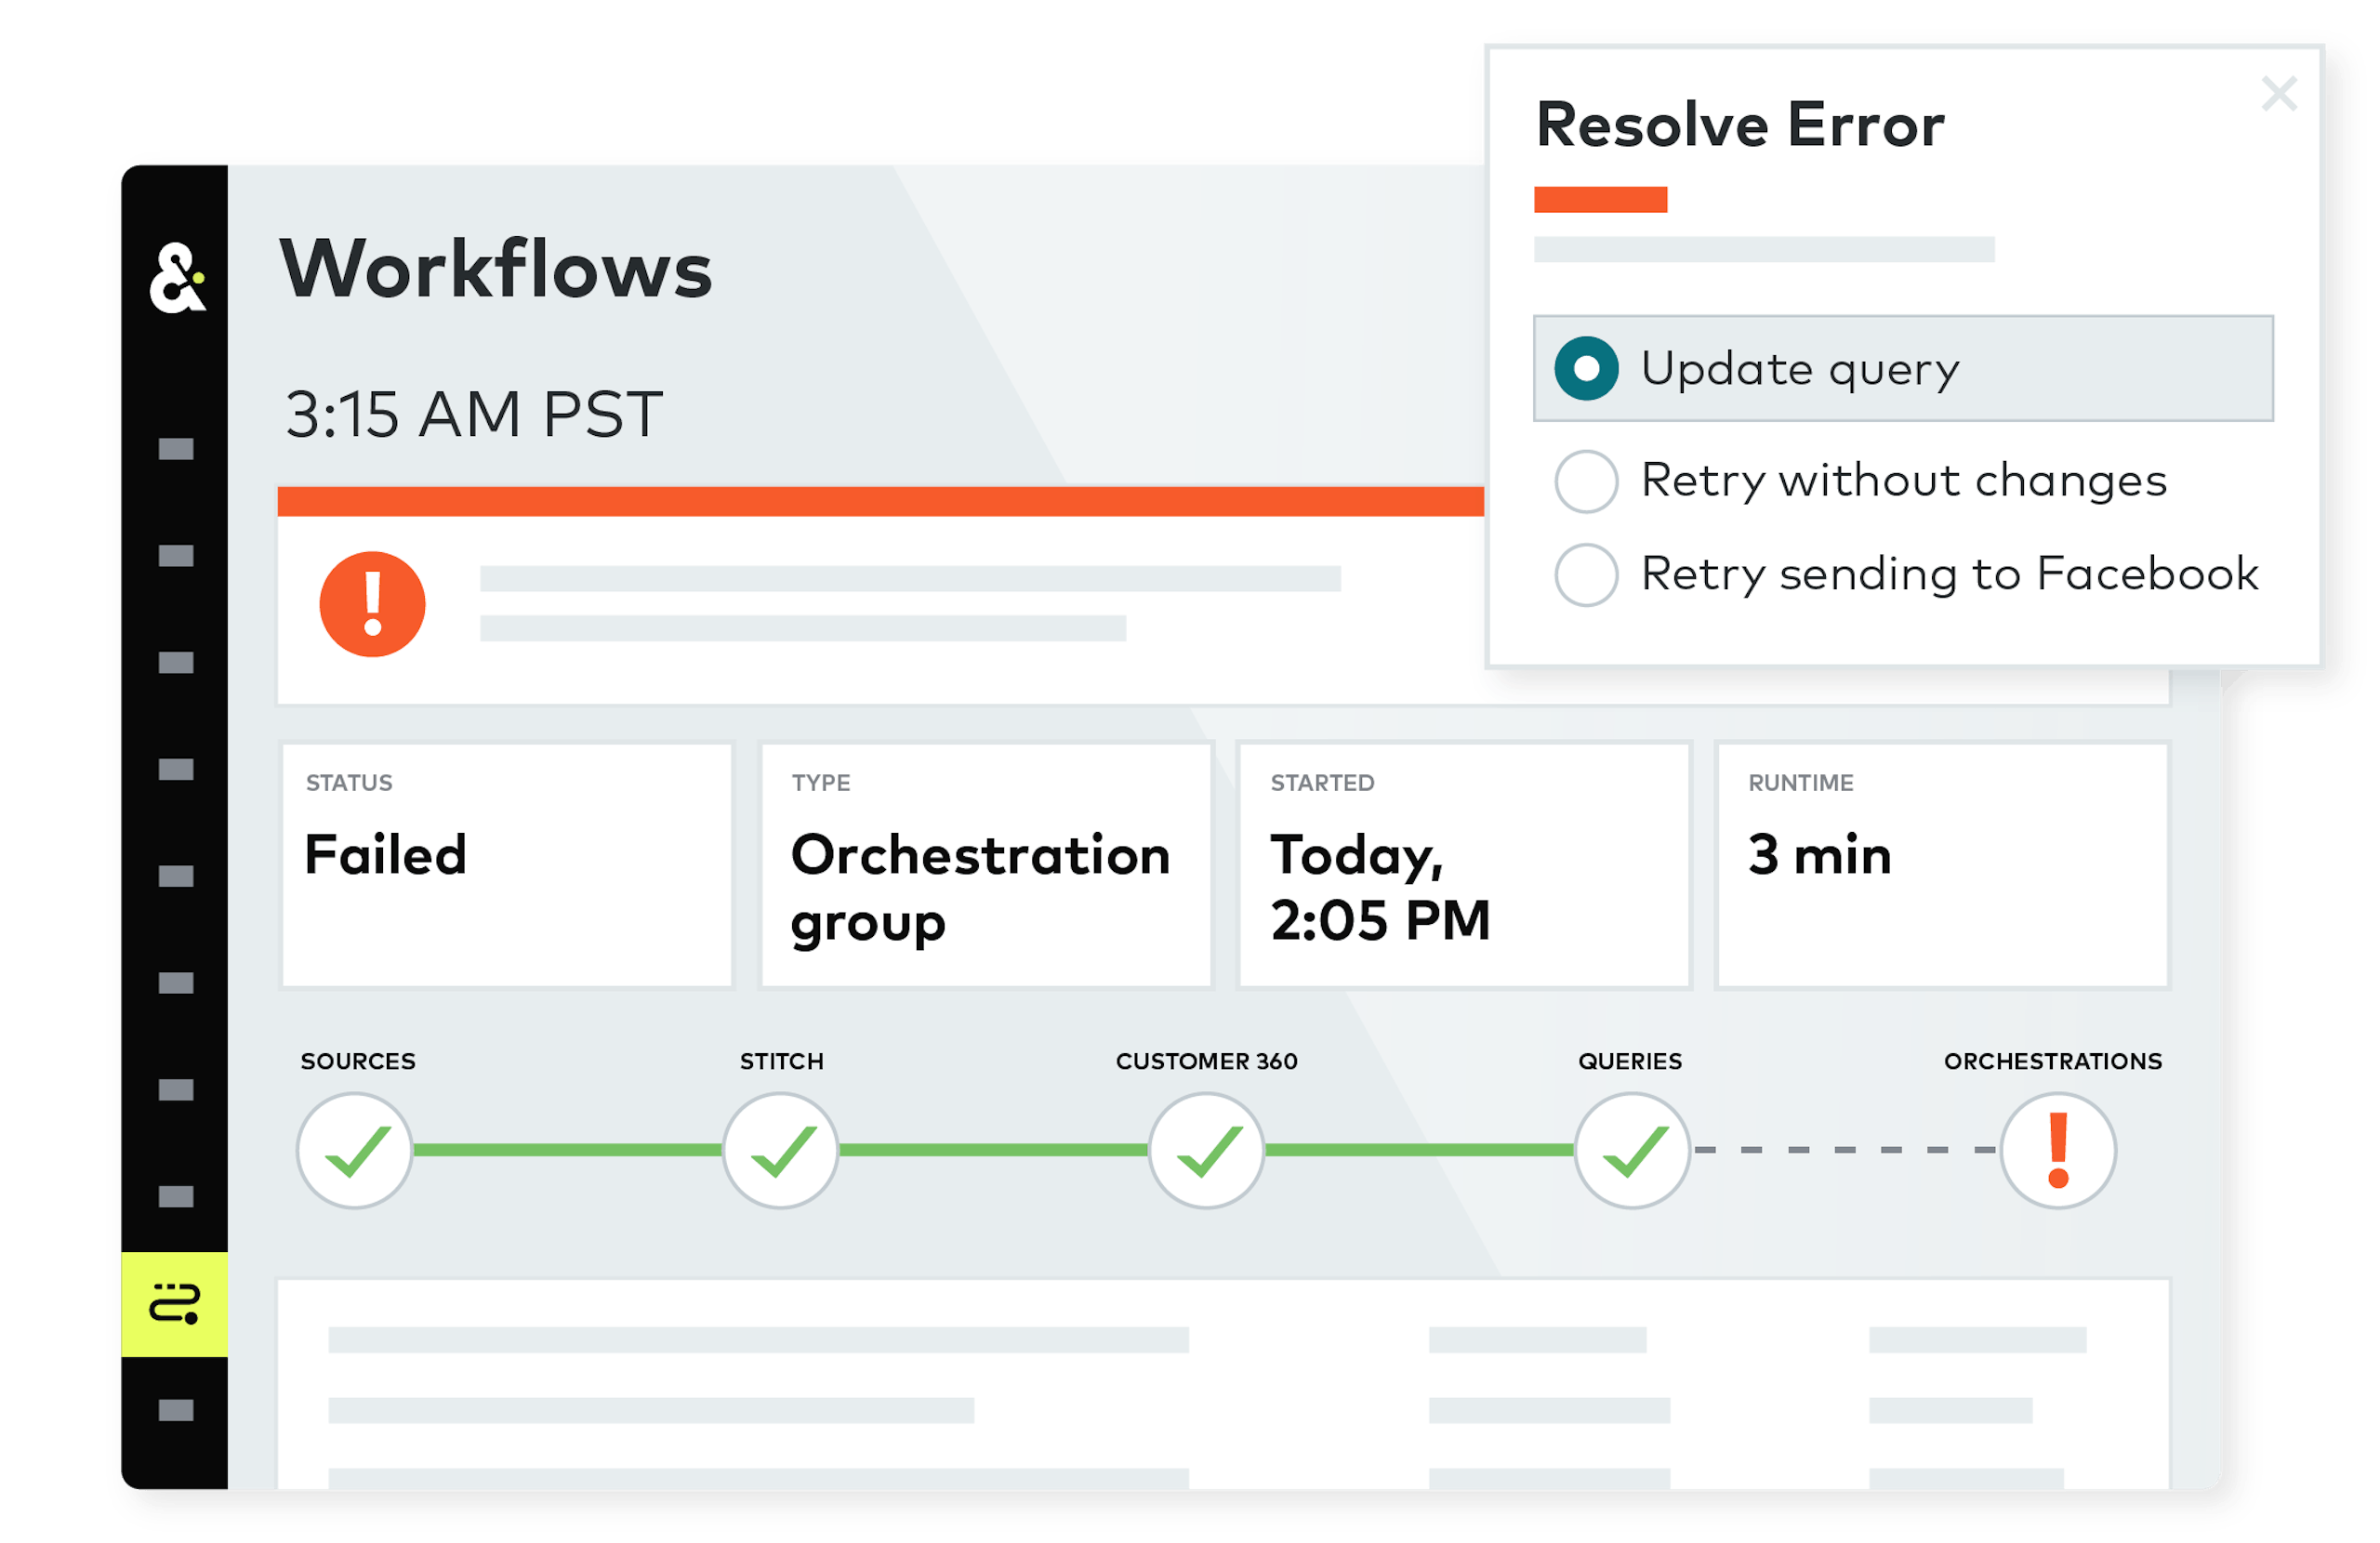 Amperity Workflows screen displaying a workflow that has failed, with an option to resolve the error through several options.